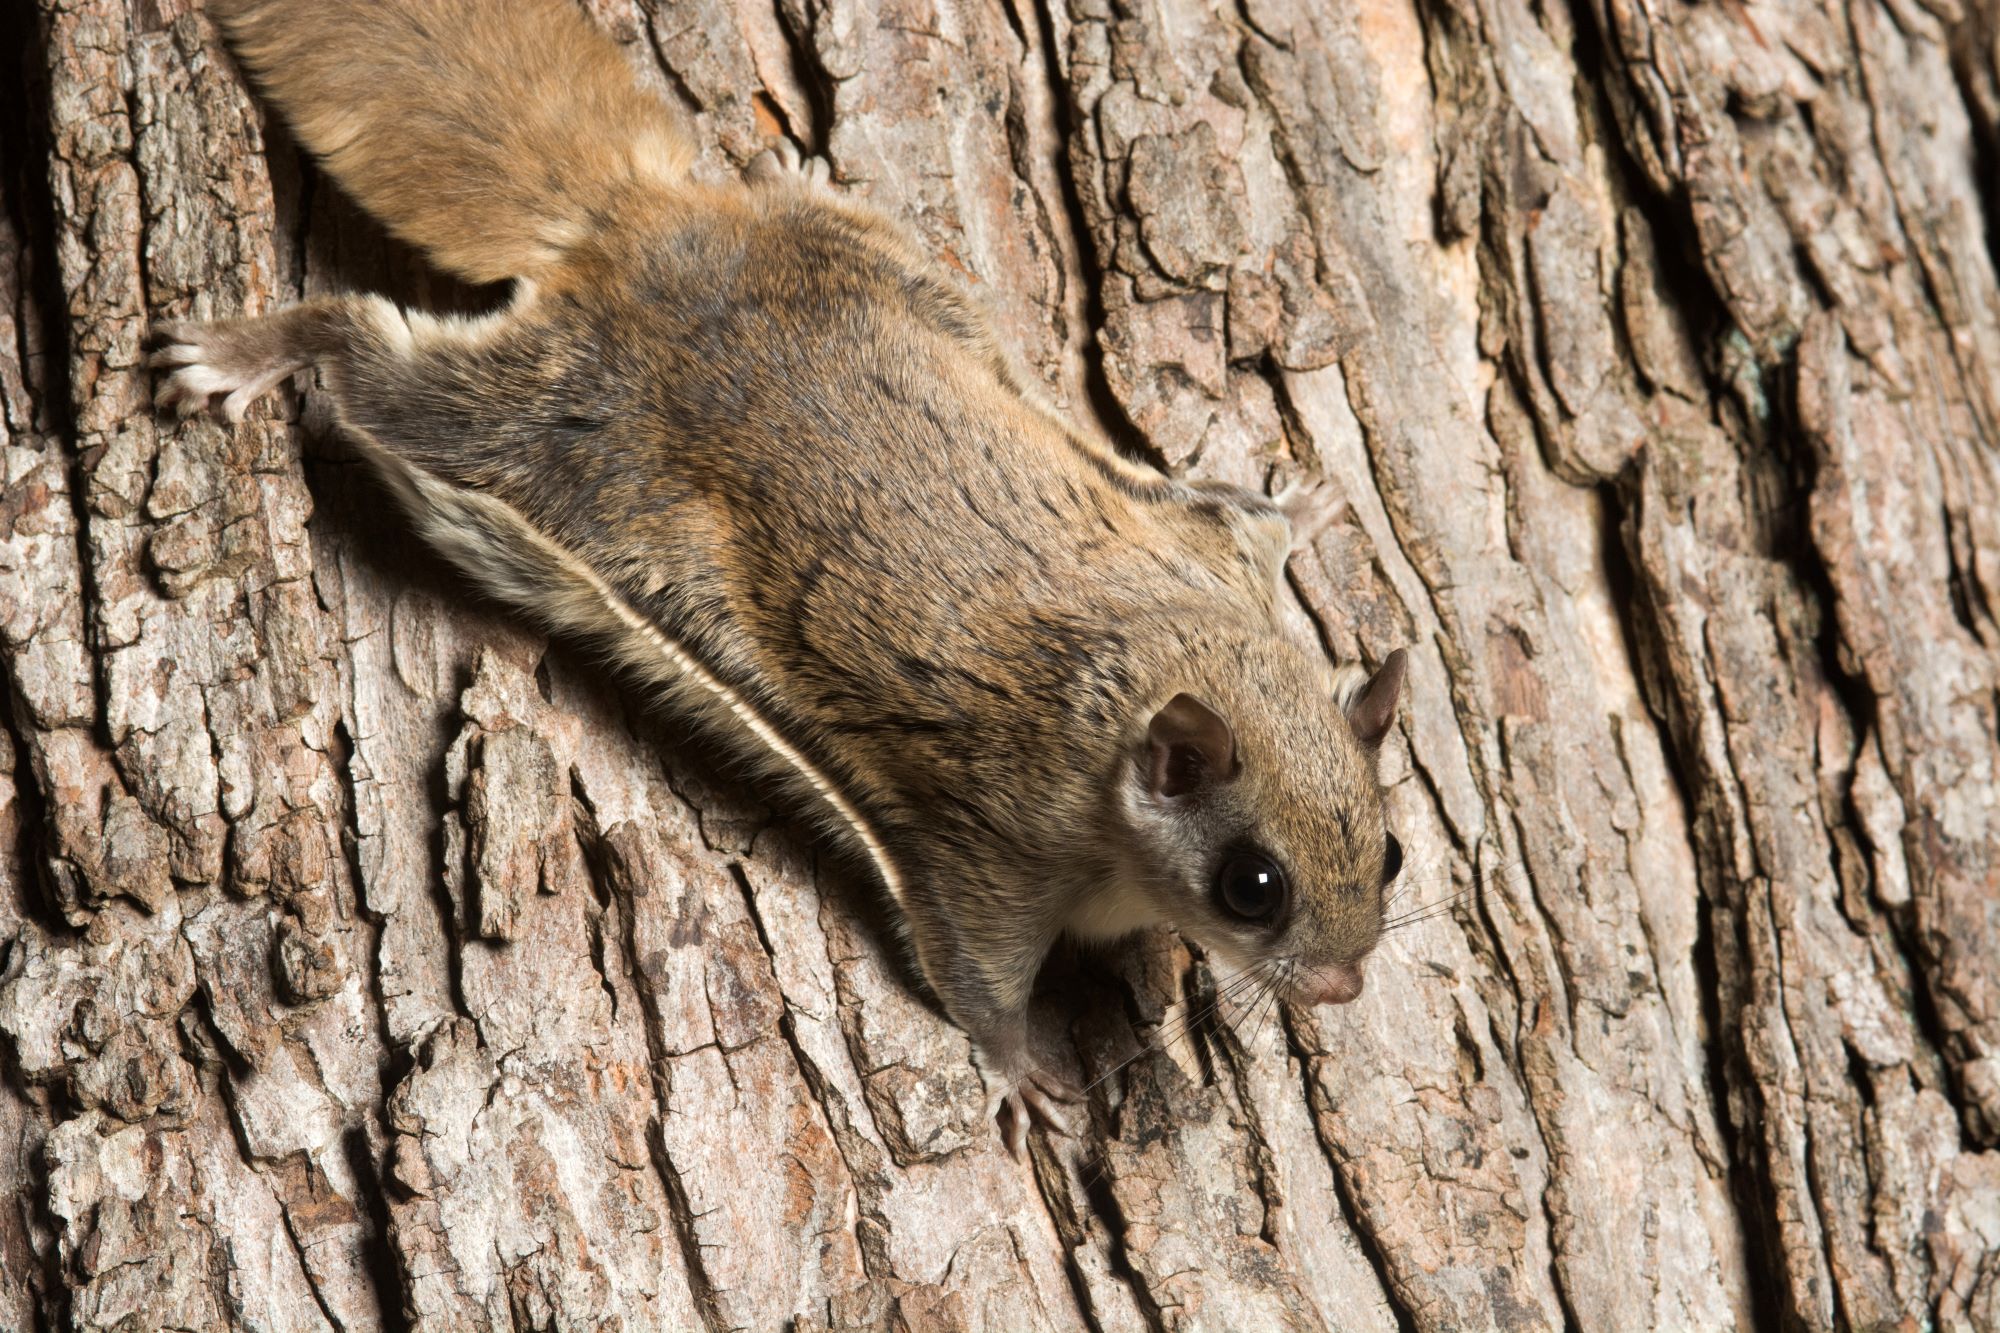 a southern flying squirrel in a den